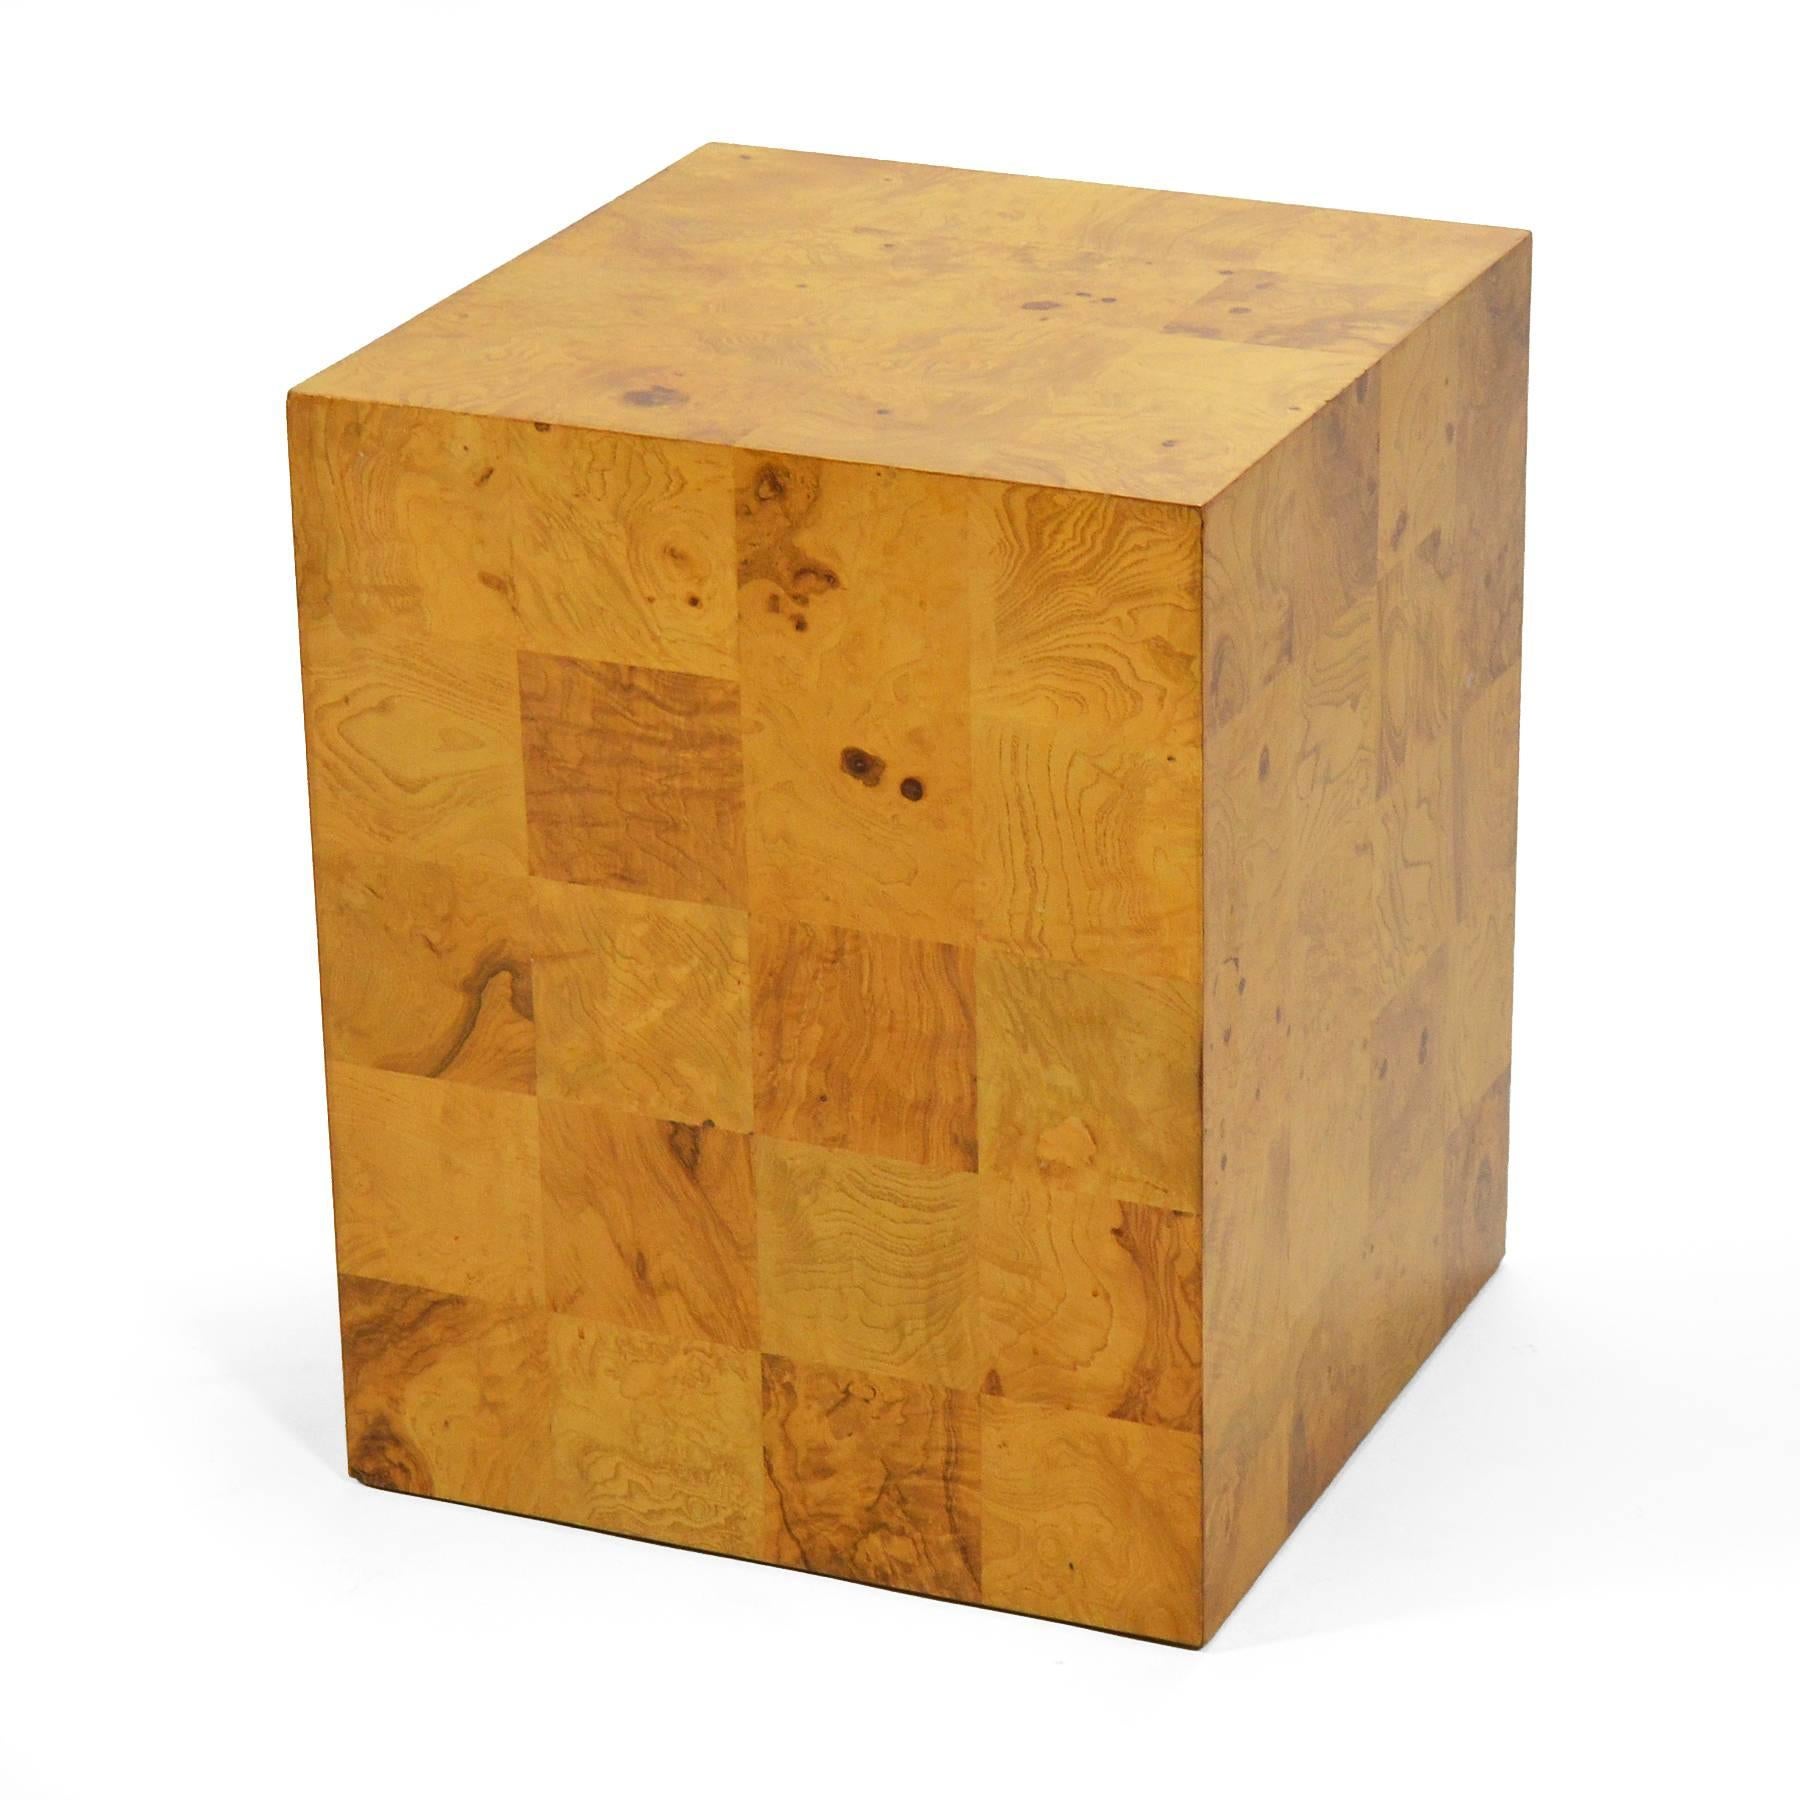 This design by Baughman is as spare as it is serviceable. The Minimalist form is embellished with a patchwork of rich burled veneer and the scale allows it to serve perfectly as an end table, lamp table, or pedestal for art or objects.